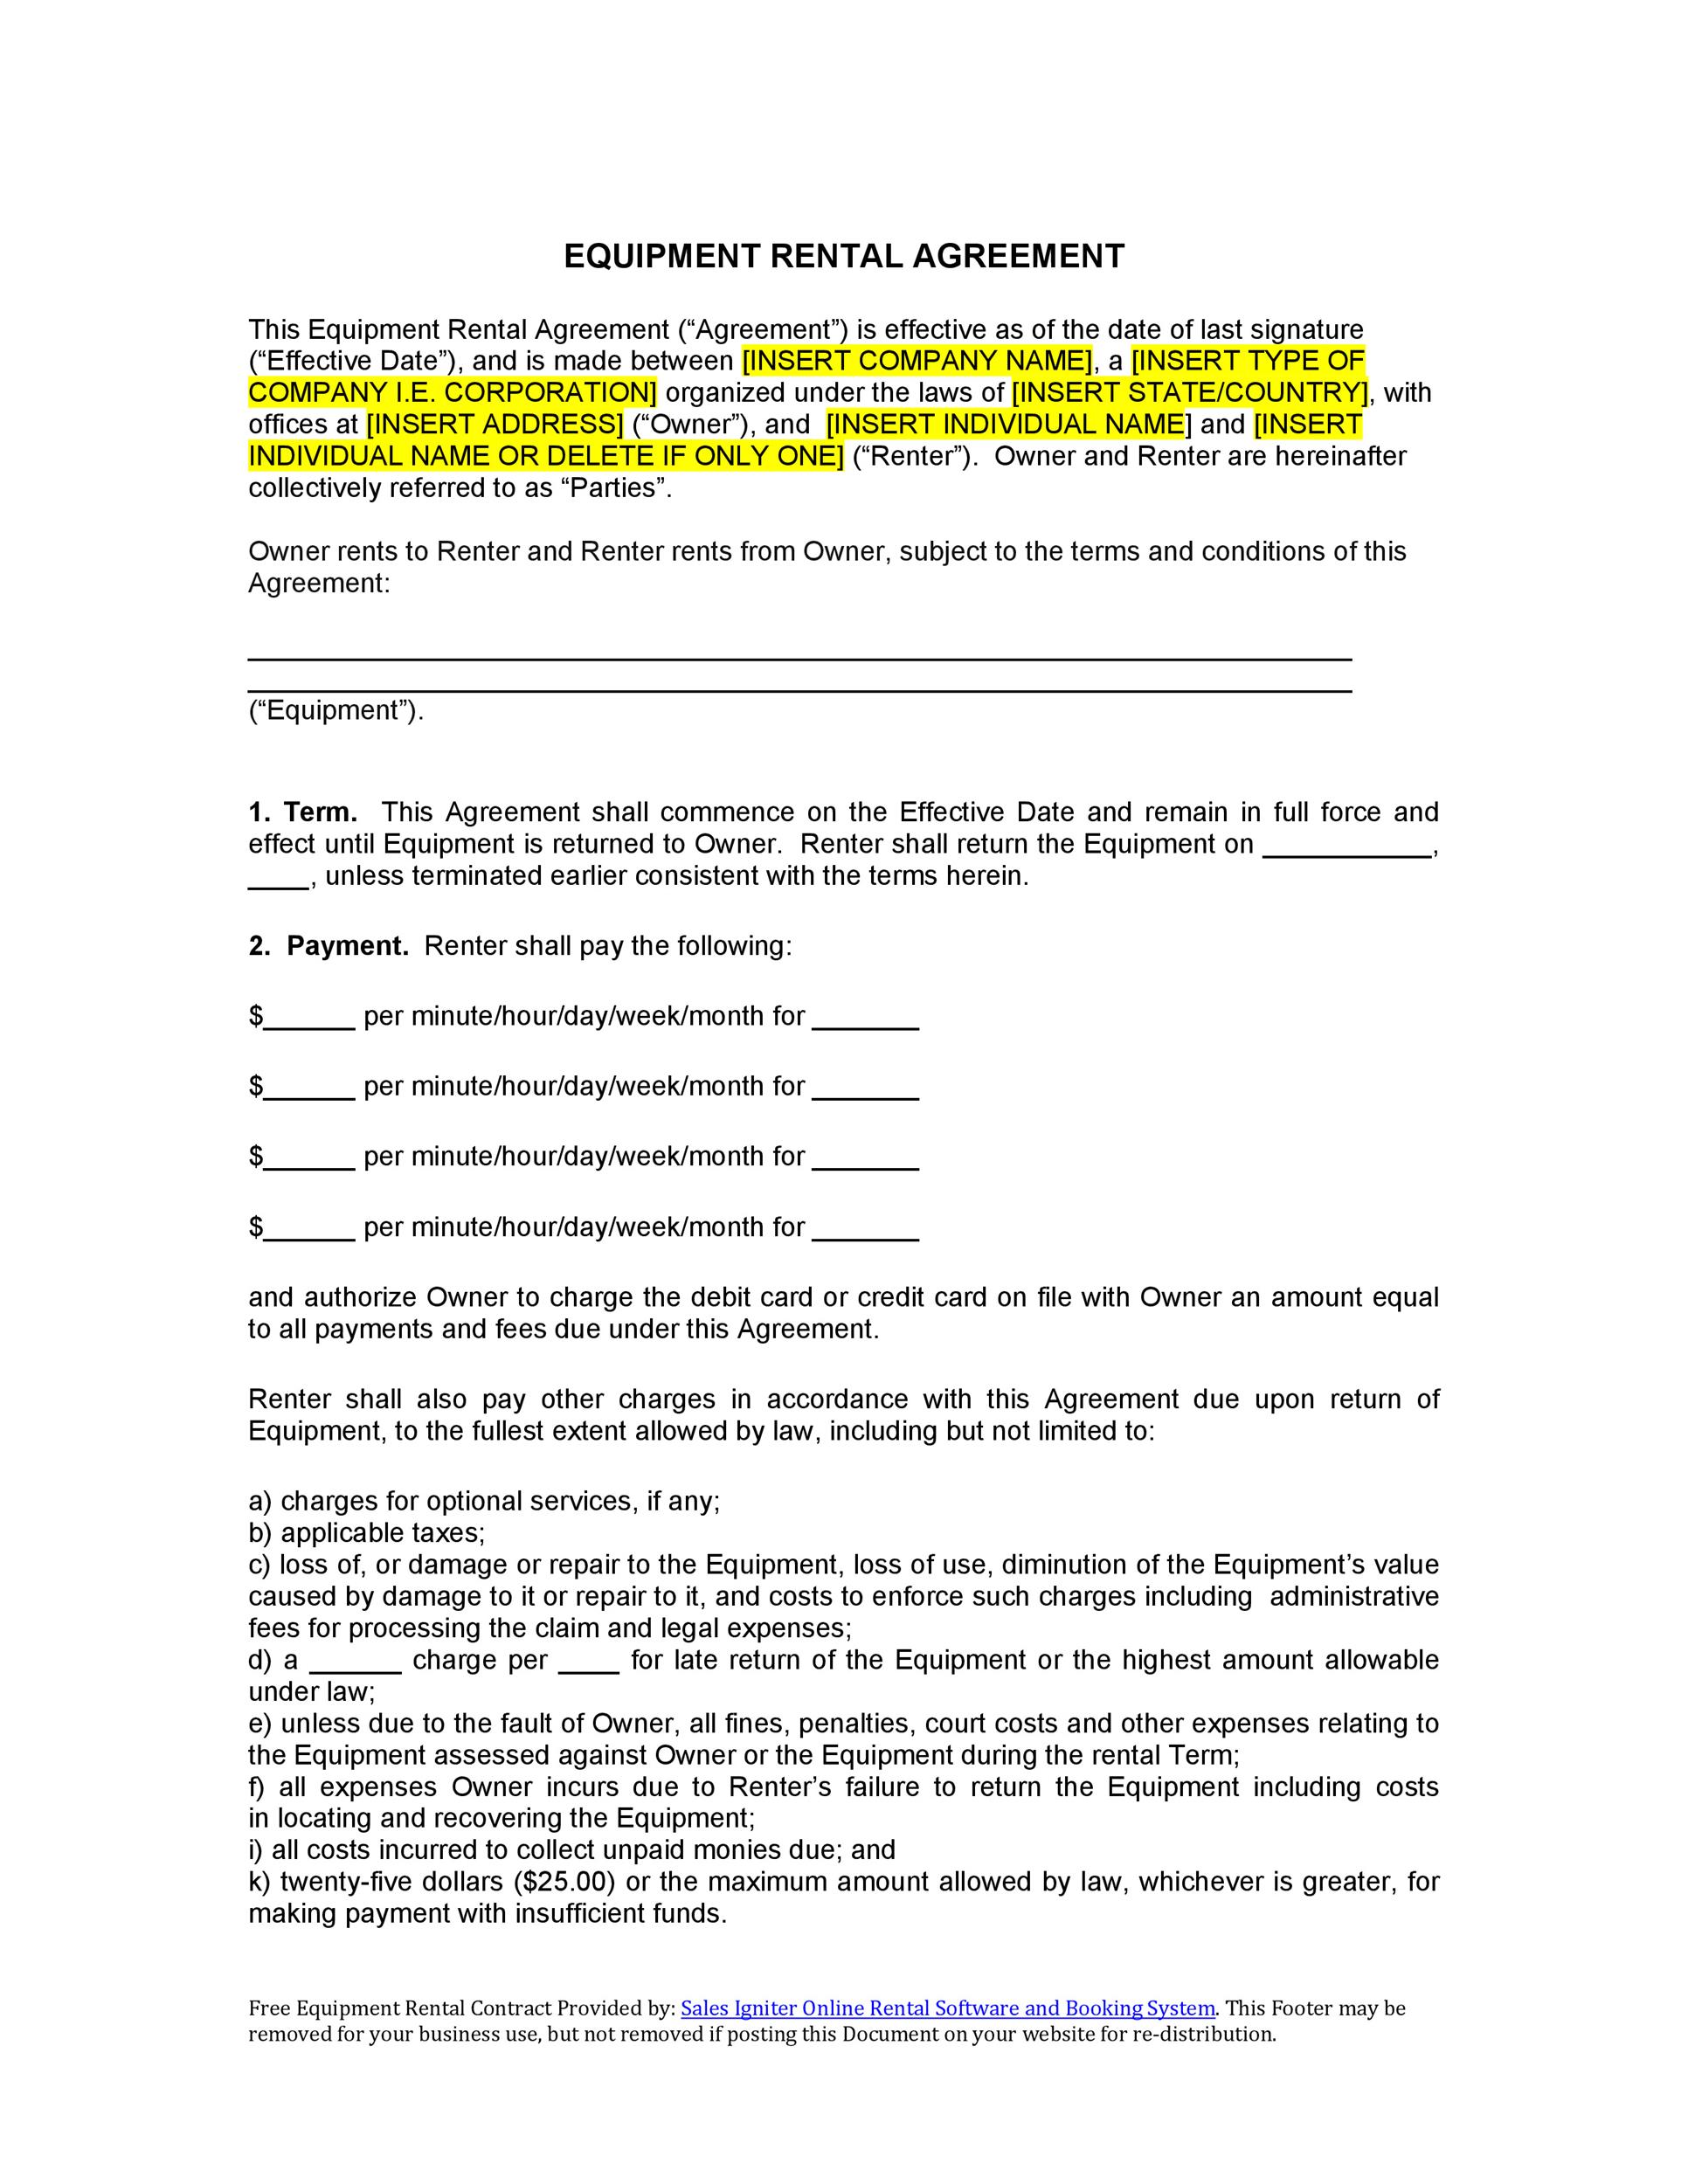 download-free-equipment-lease-agreement-printable-lease-equipment-rental-agreement-lease